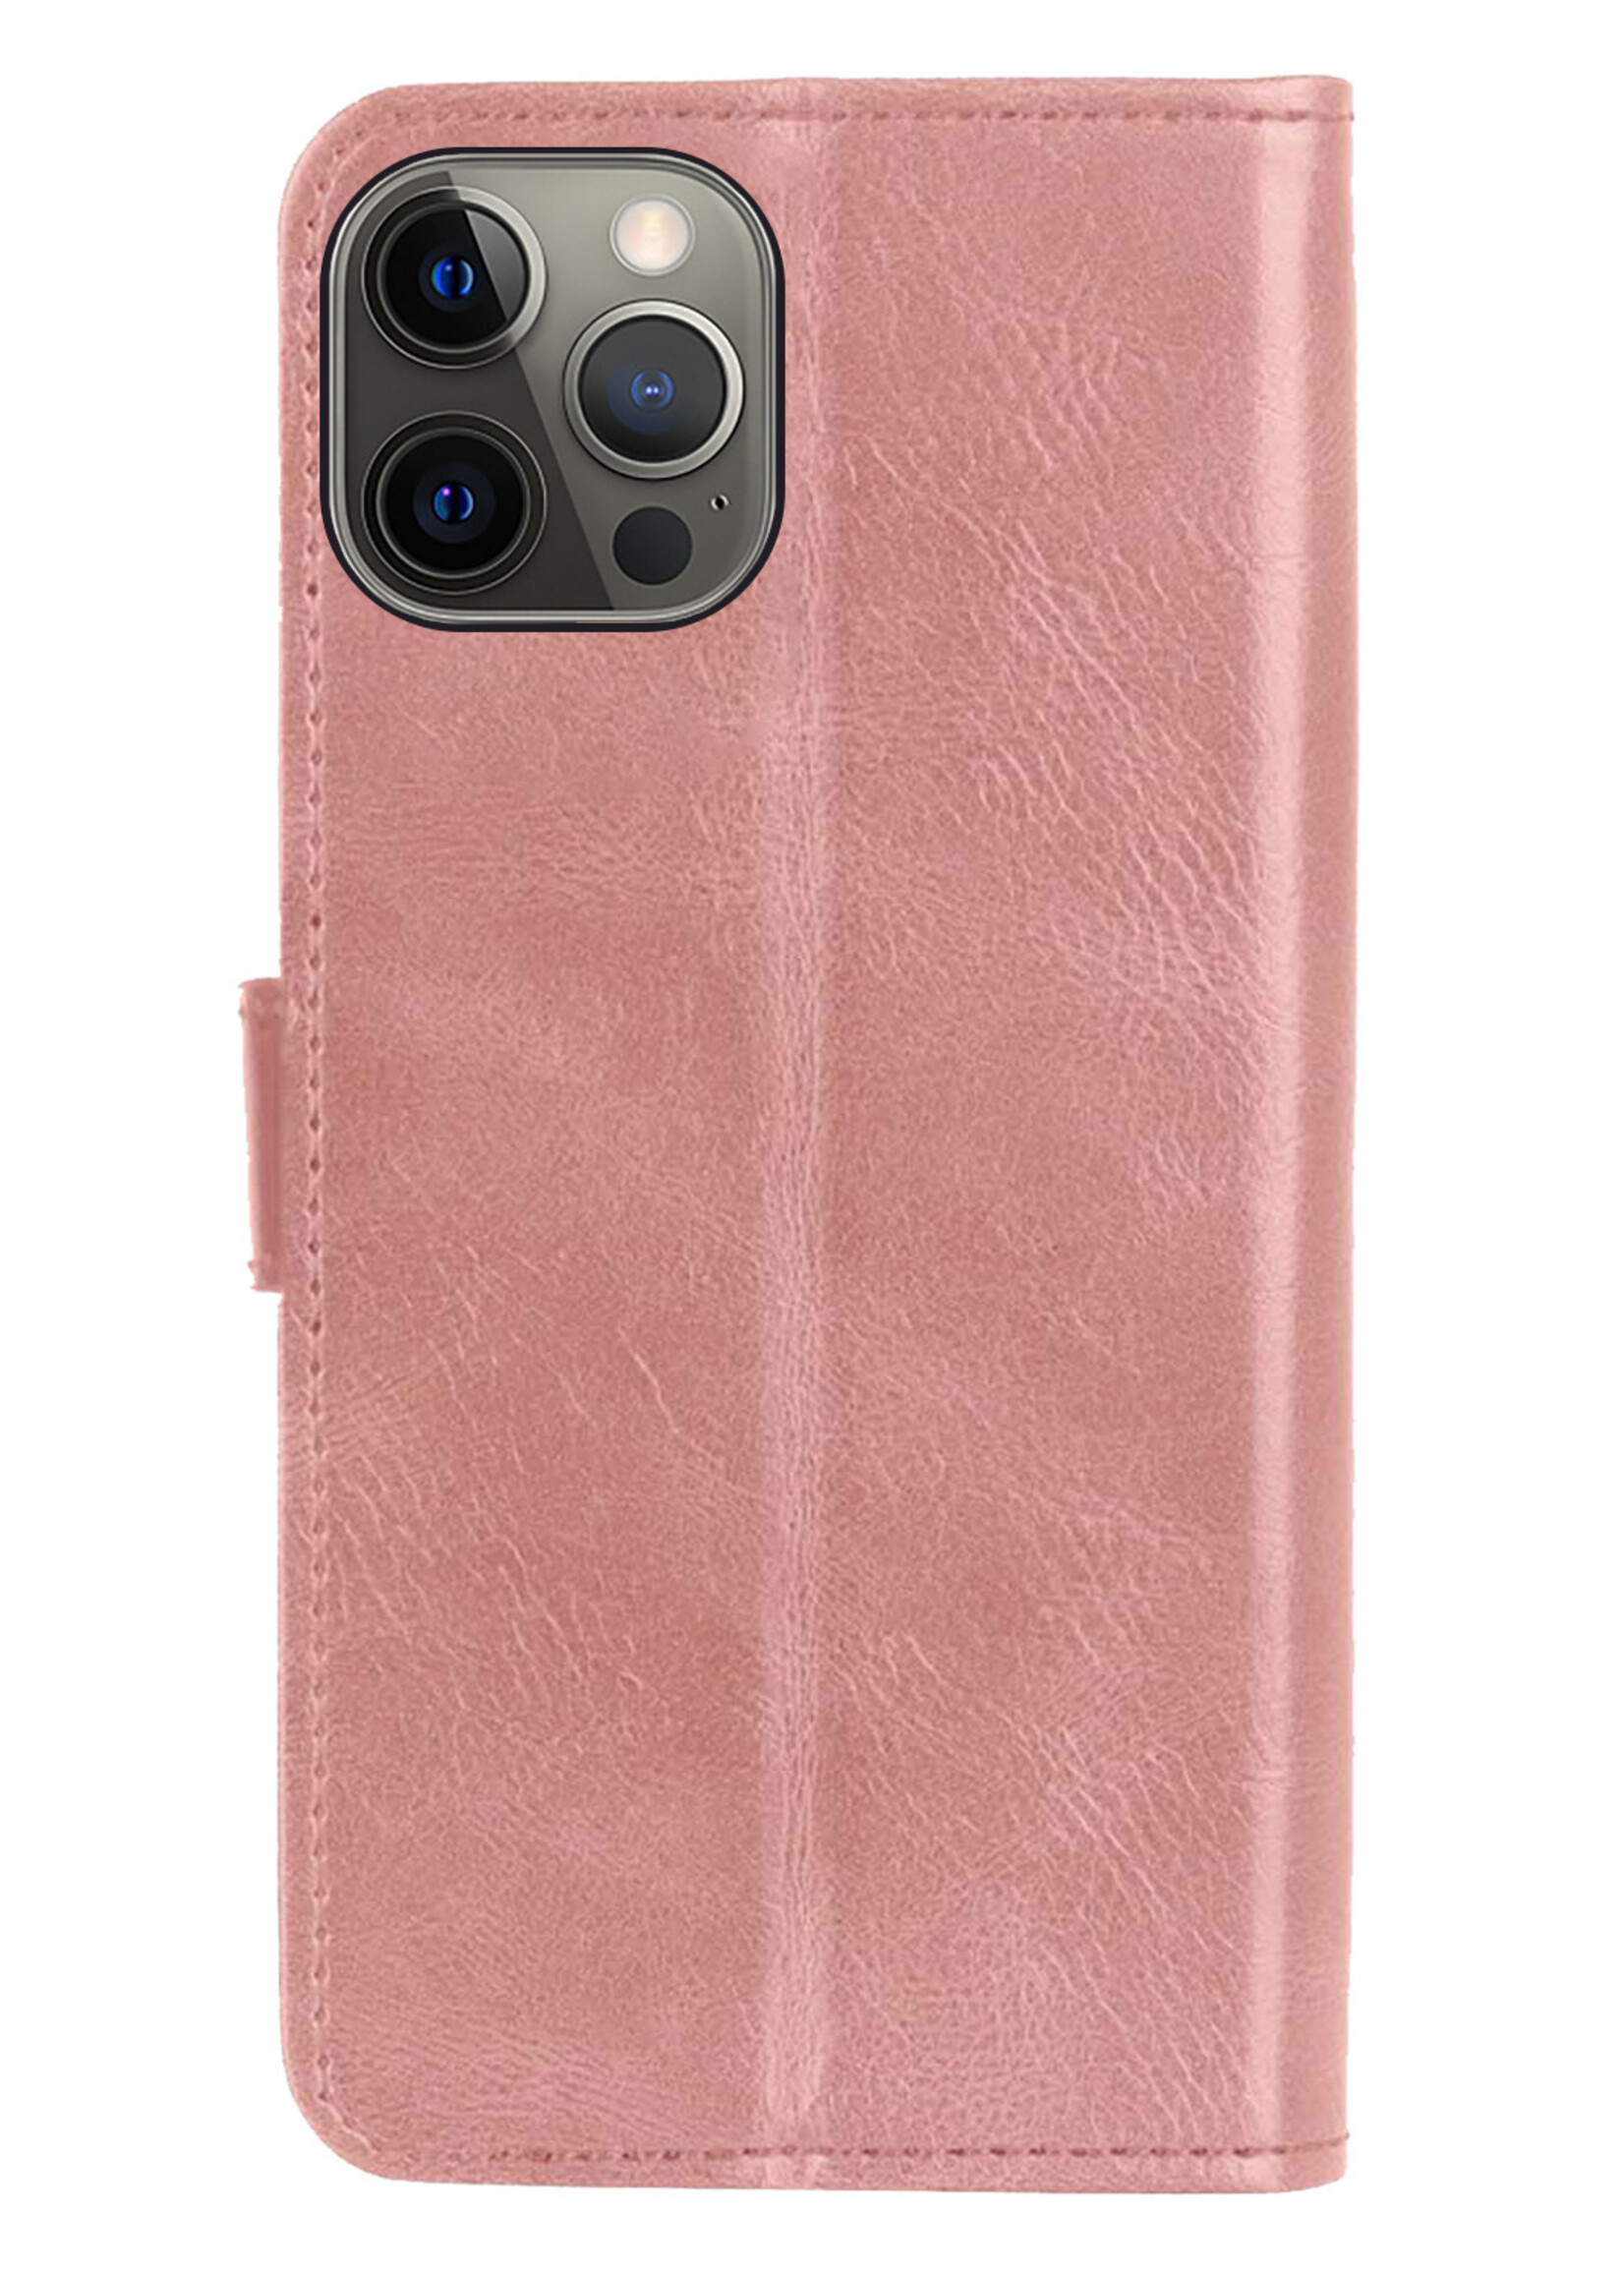 BTH Hoes voor iPhone 14 Pro Hoesje Book Case Hoes Portemonnee Cover Walletcase - Hoes voor iPhone 14 Pro Hoes Bookcase Hoesje - Rose Goud